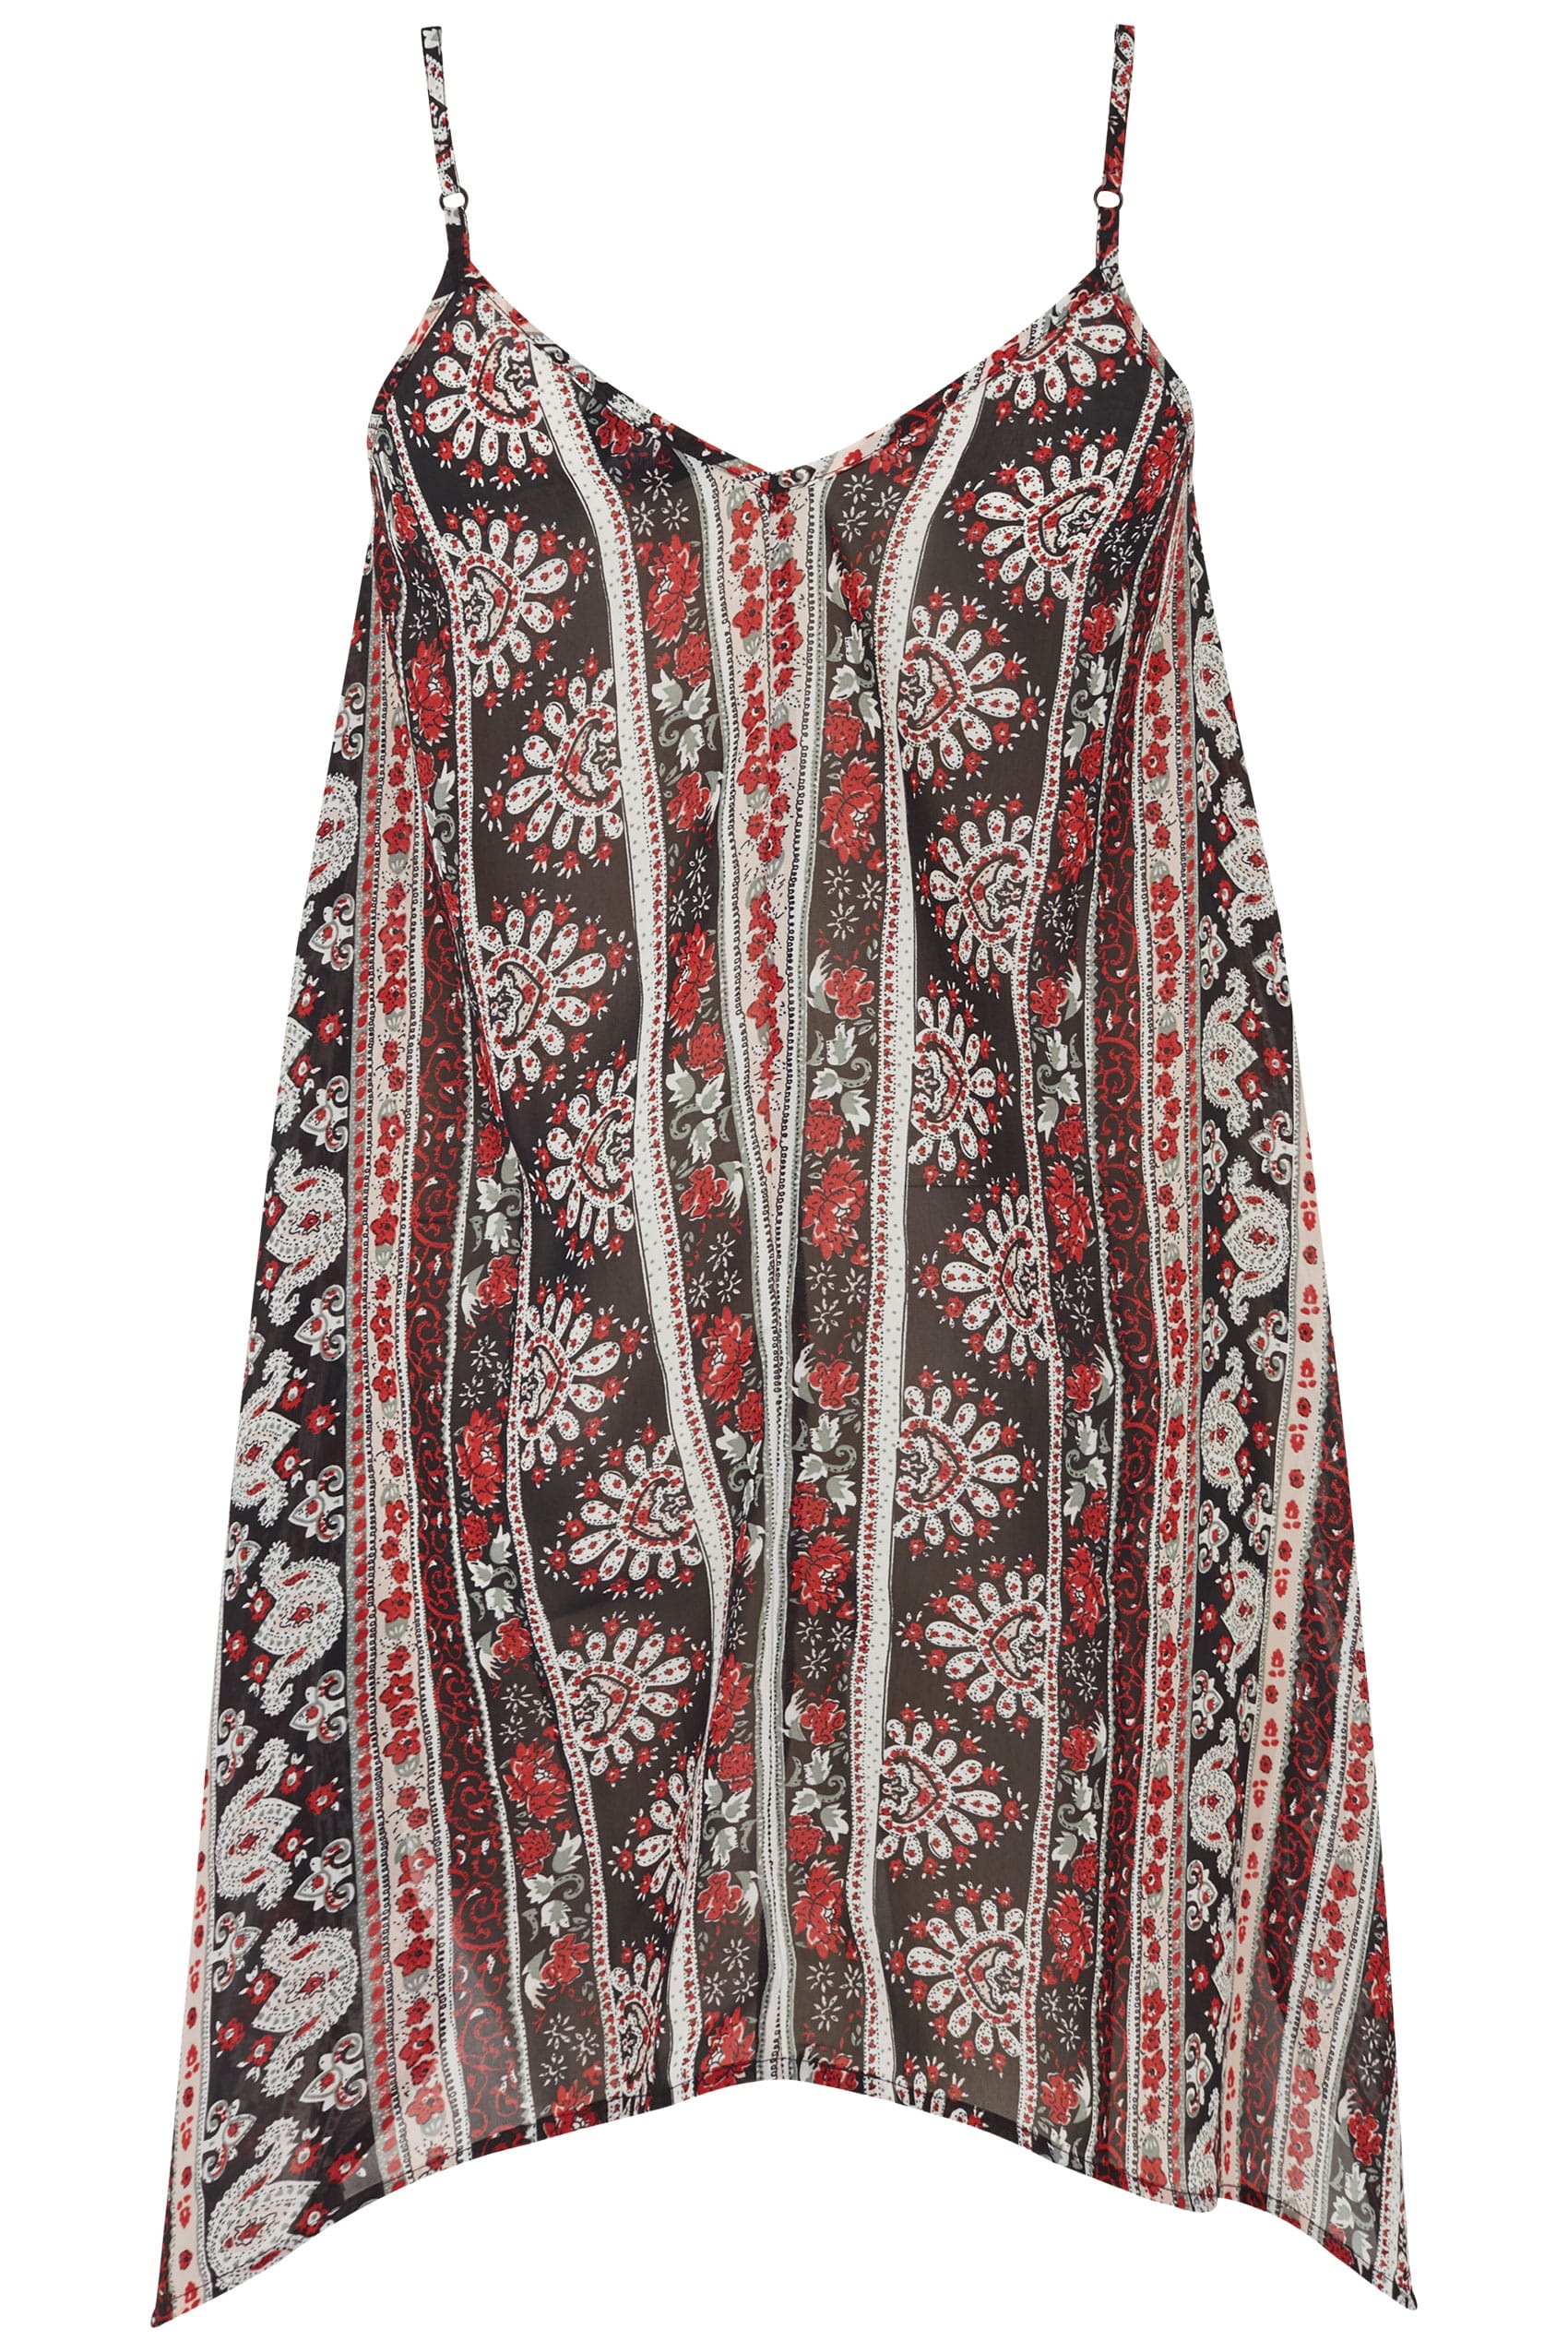 Black & Red Aztec Print Cami Top With Hanky Hem, plus size 16 to 36